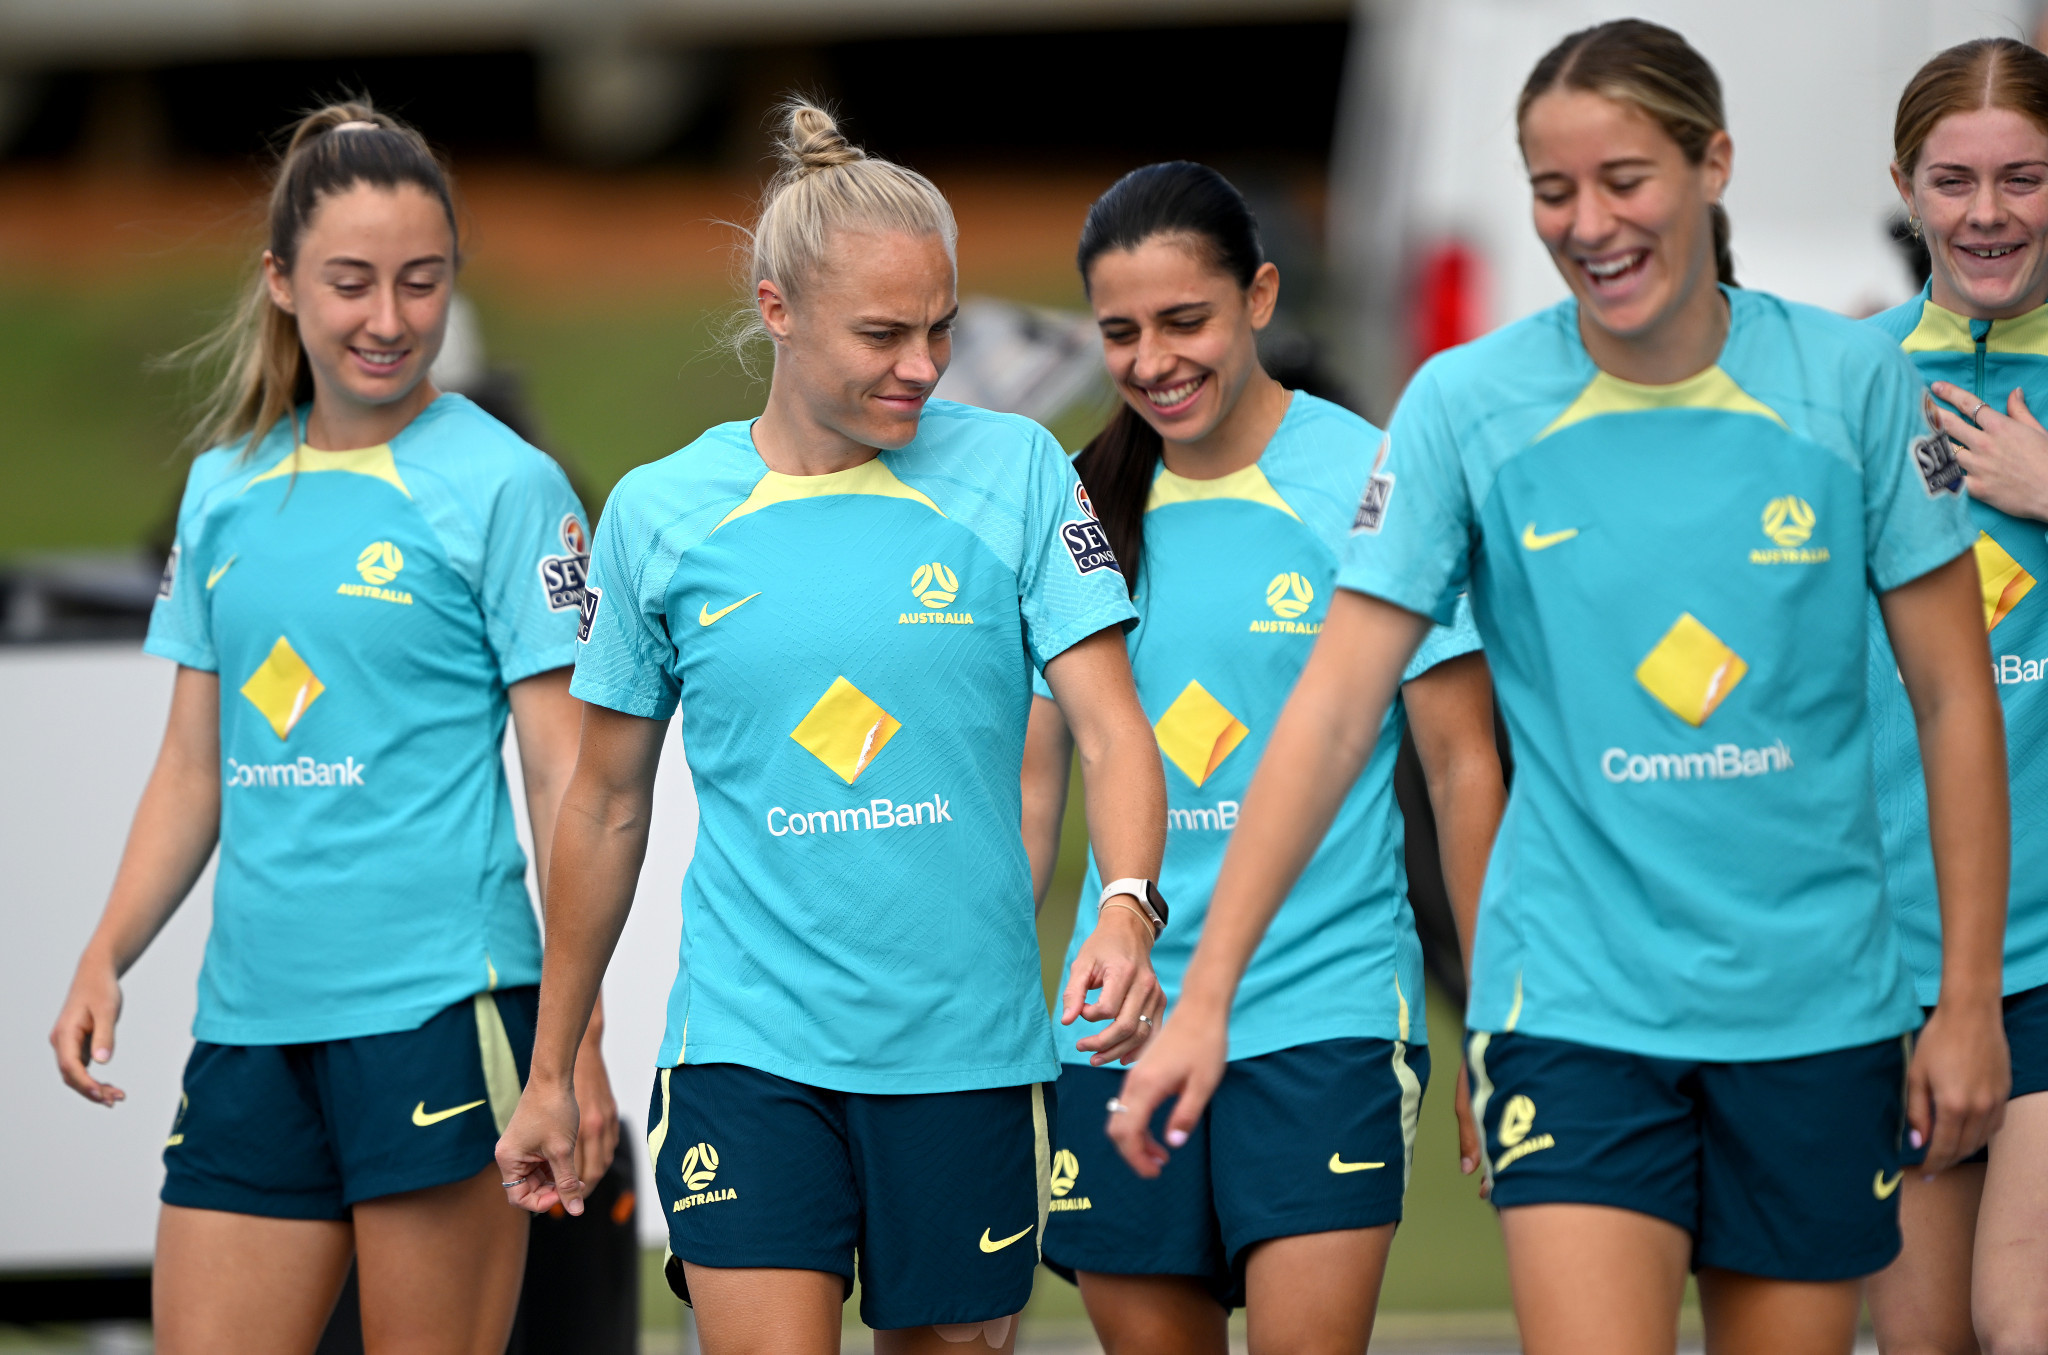 The Queensland Government are hoping funding will inspire grassroots athletes to emulate the Matildas football team who were training in Brisbane before Saturday's FIFA Women's World Cup quarter-final against France ©Getty Images